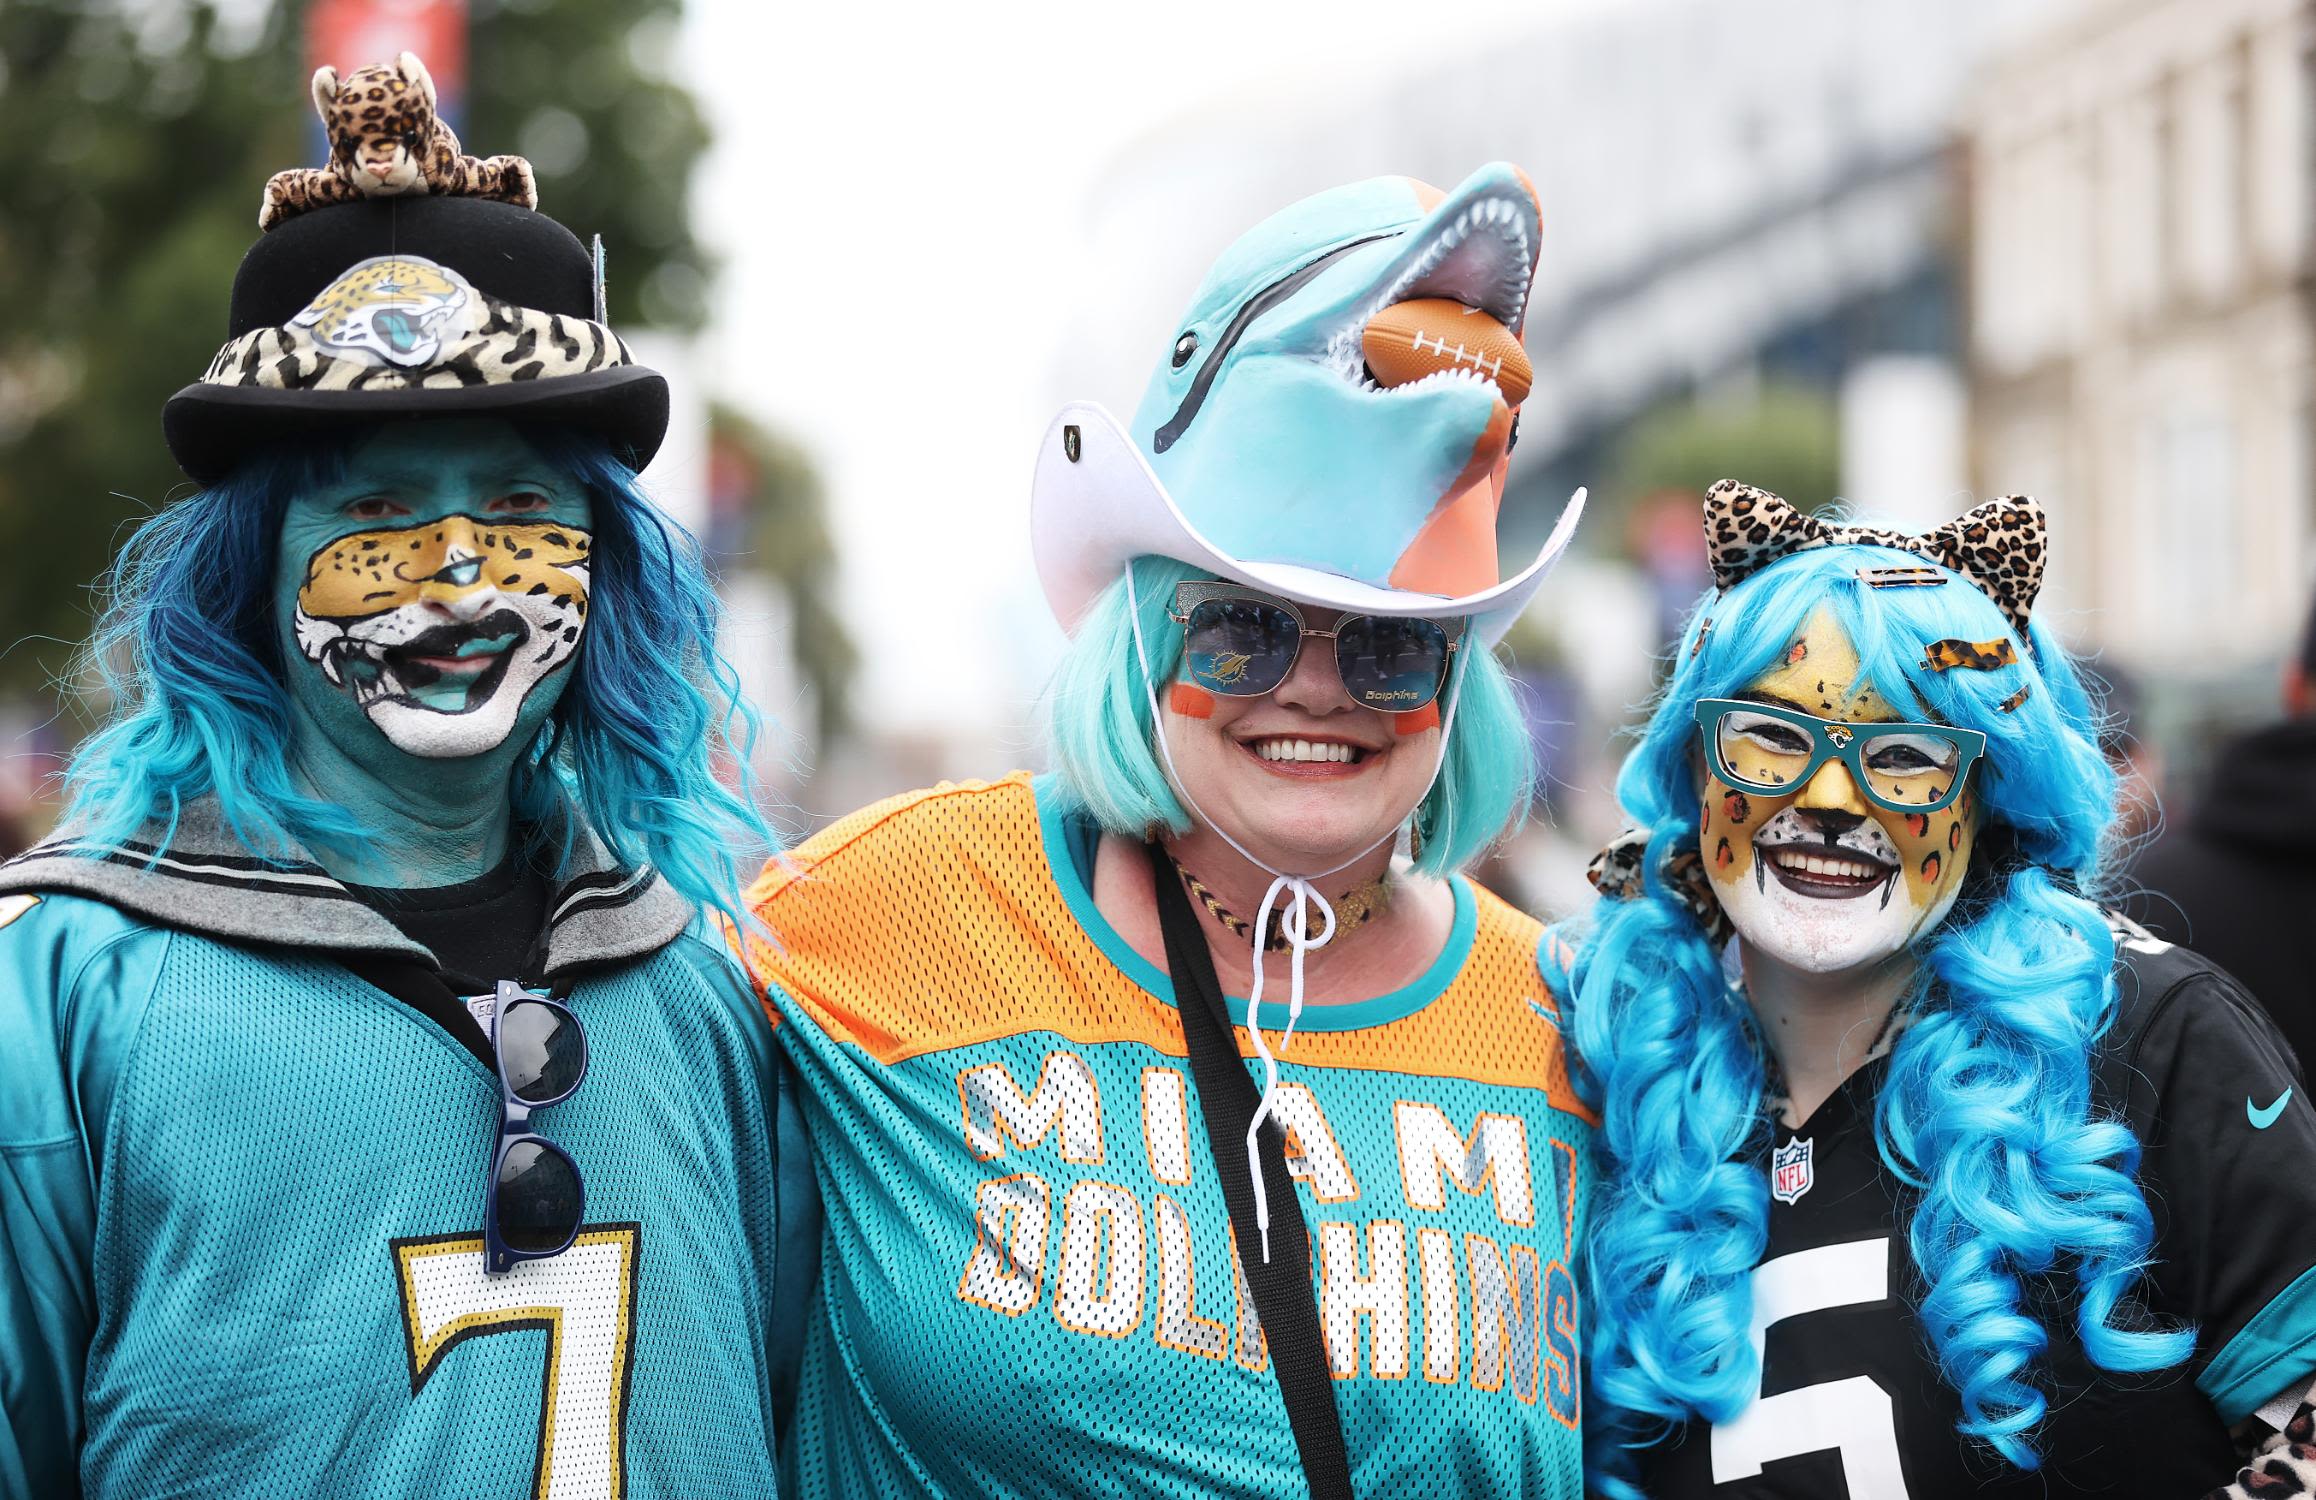 What Jaguars fans need to know about Miami Dolphins preseason game